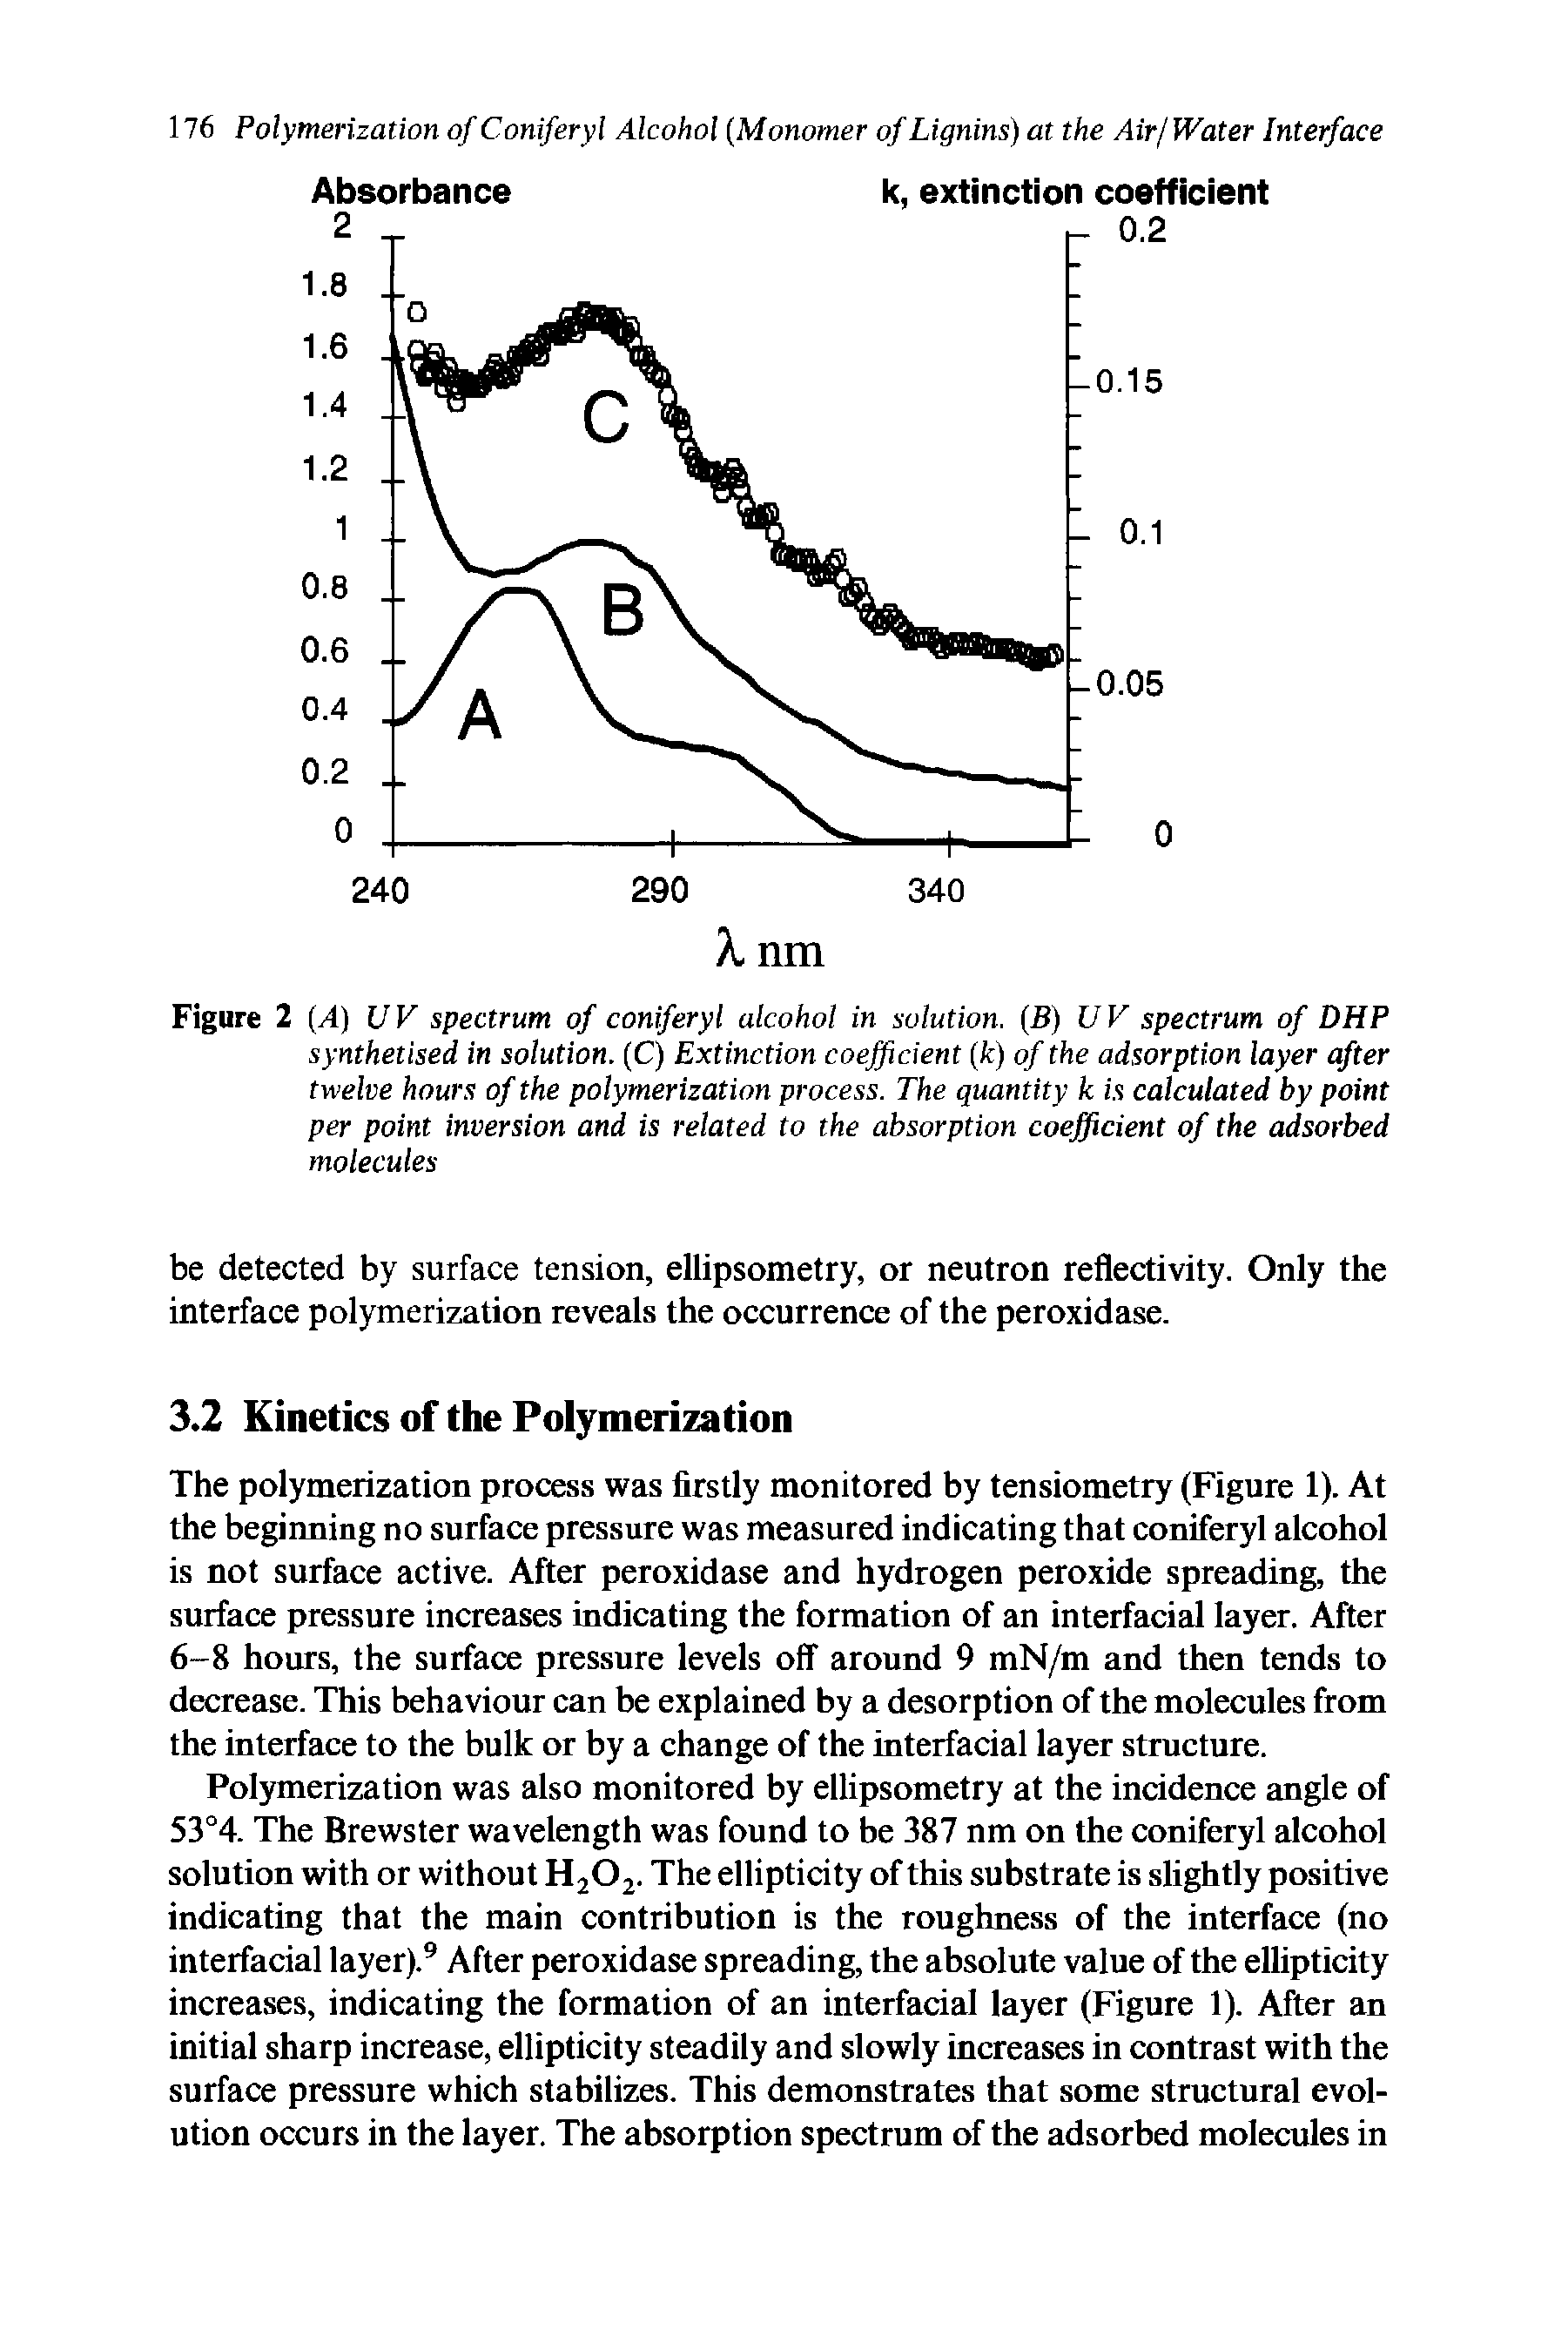 Figure 2 (A) UV spectrum of coniferyl alcohol in solution. (B) UV spectrum of DHP synthetised in solution. (C) Extinction coefficient (k) of the adsorption layer after twelve hours of the polymerization process. The quantity k is calculated by point per point inversion and is related to the absorption coefficient of the adsorbed molecules...